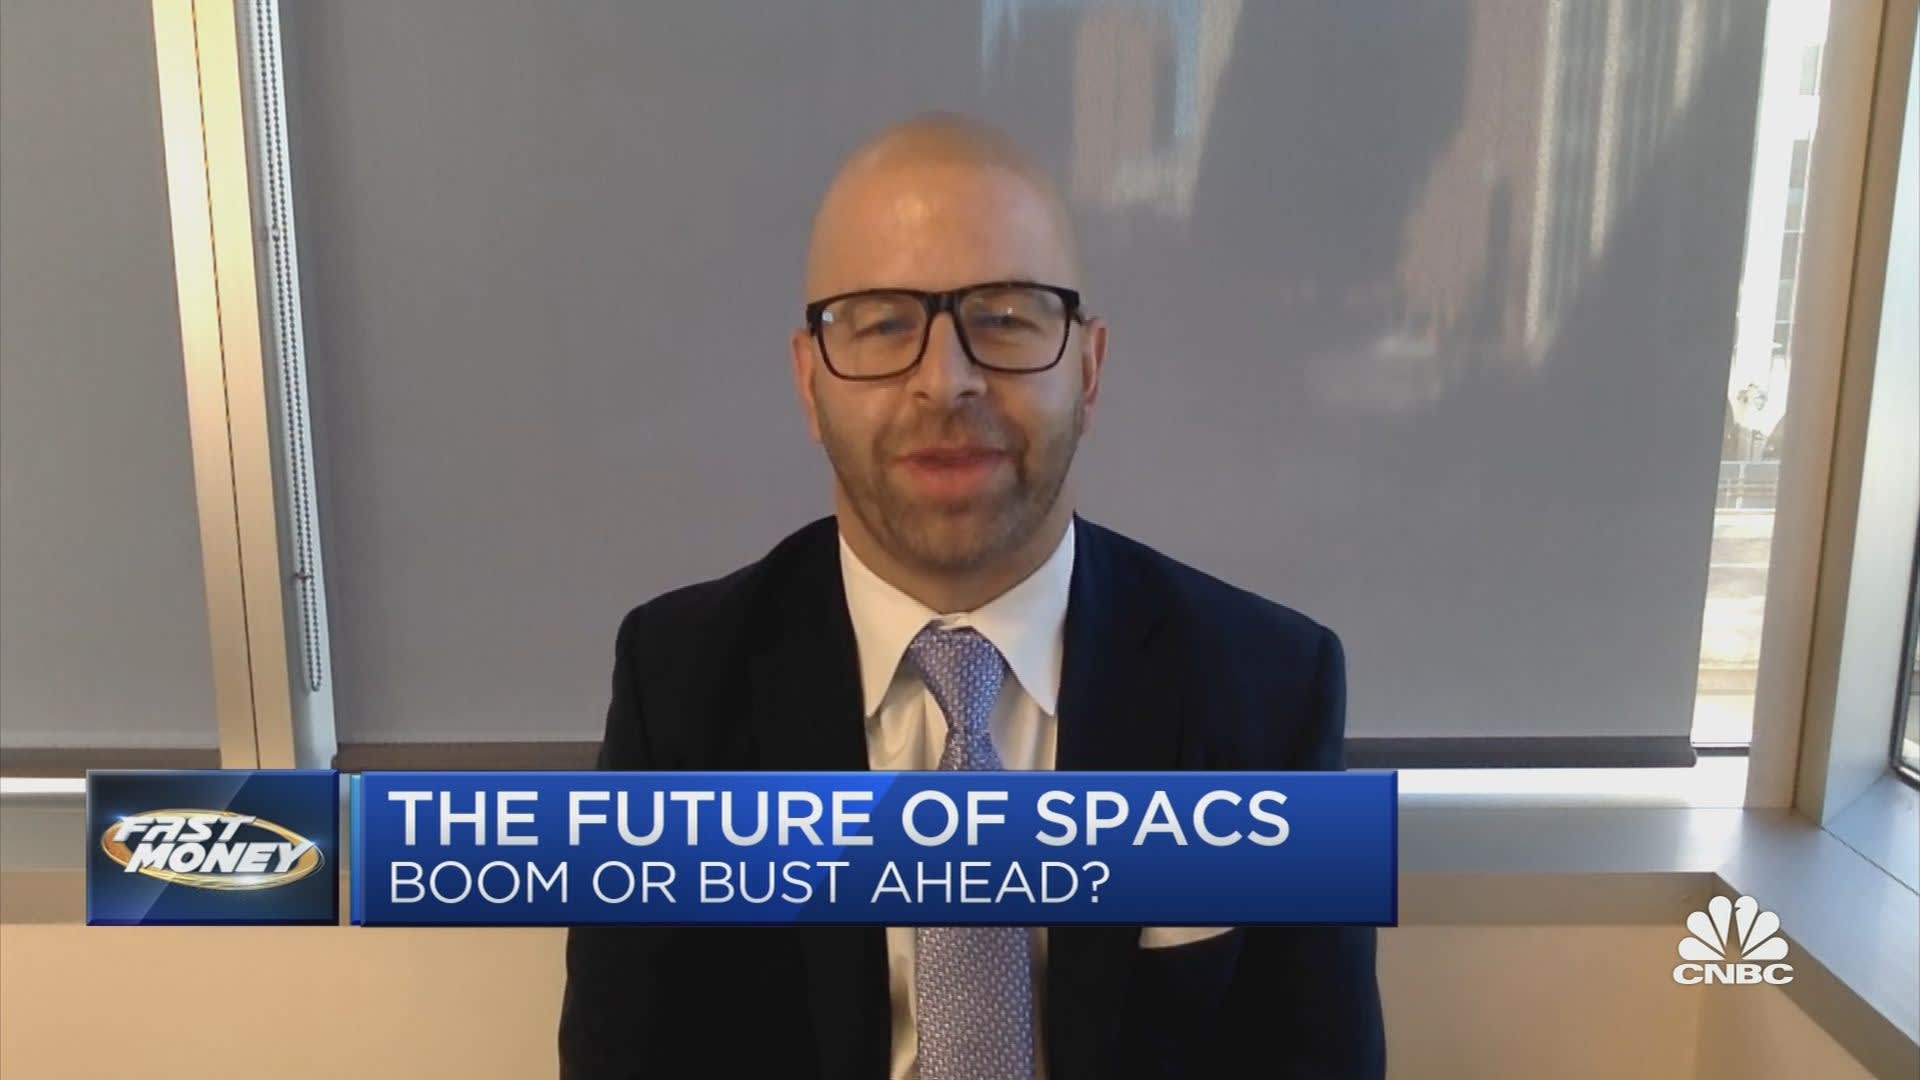 SPAC-tacular demise of SPACs? Looking for winners in the space